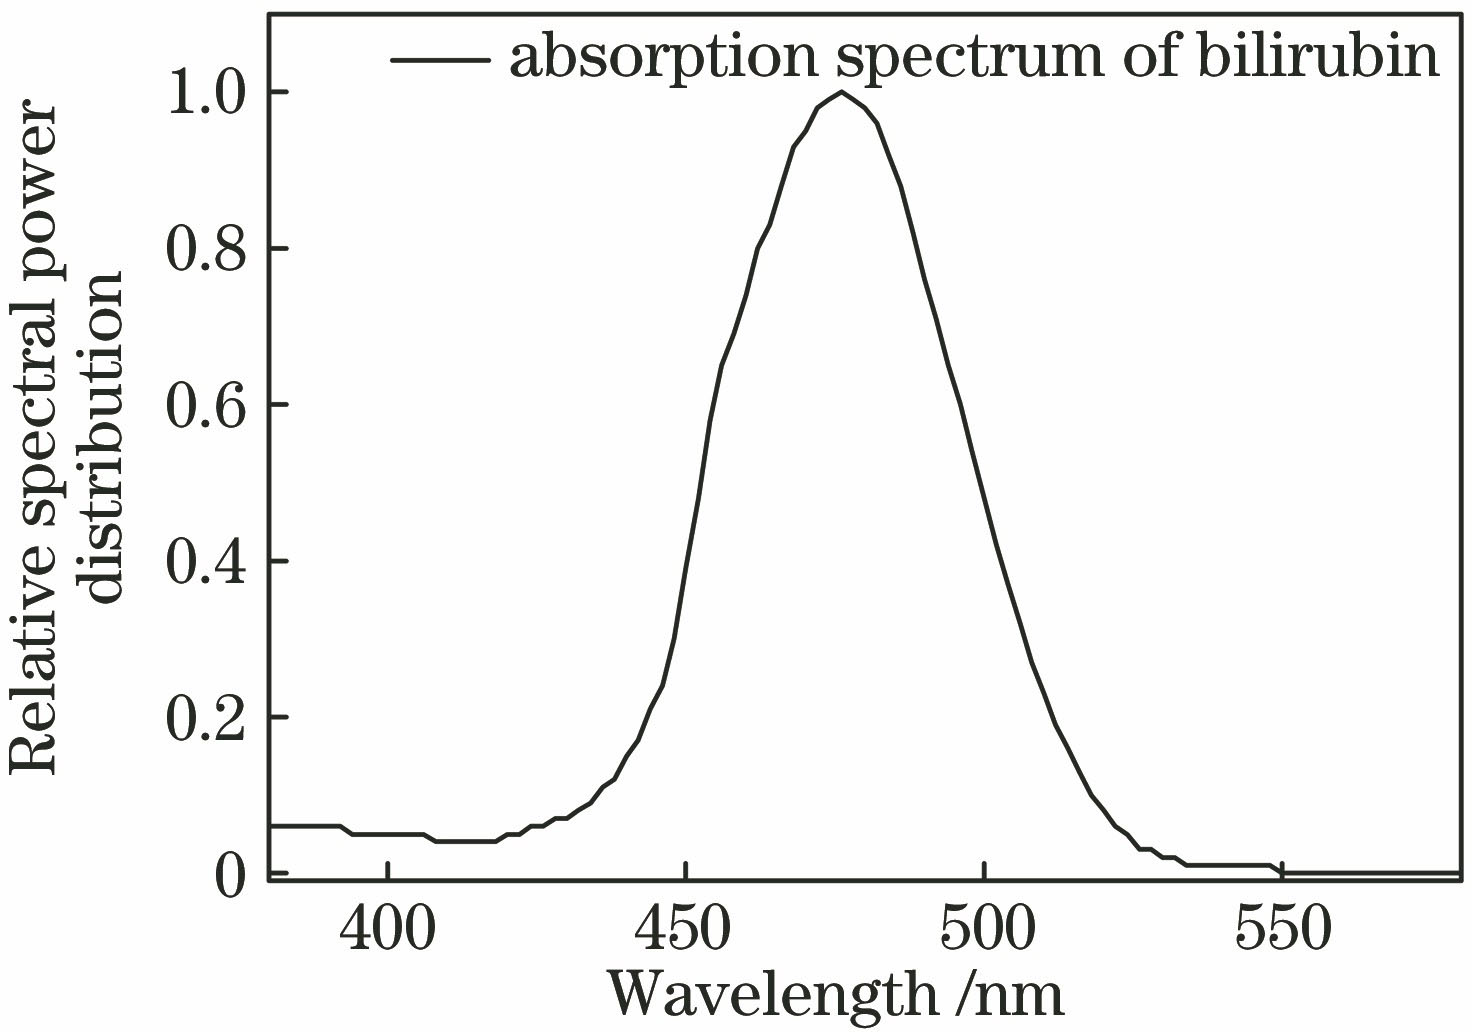 Absorption spectrum of the bilirubin in extracorporeal blood